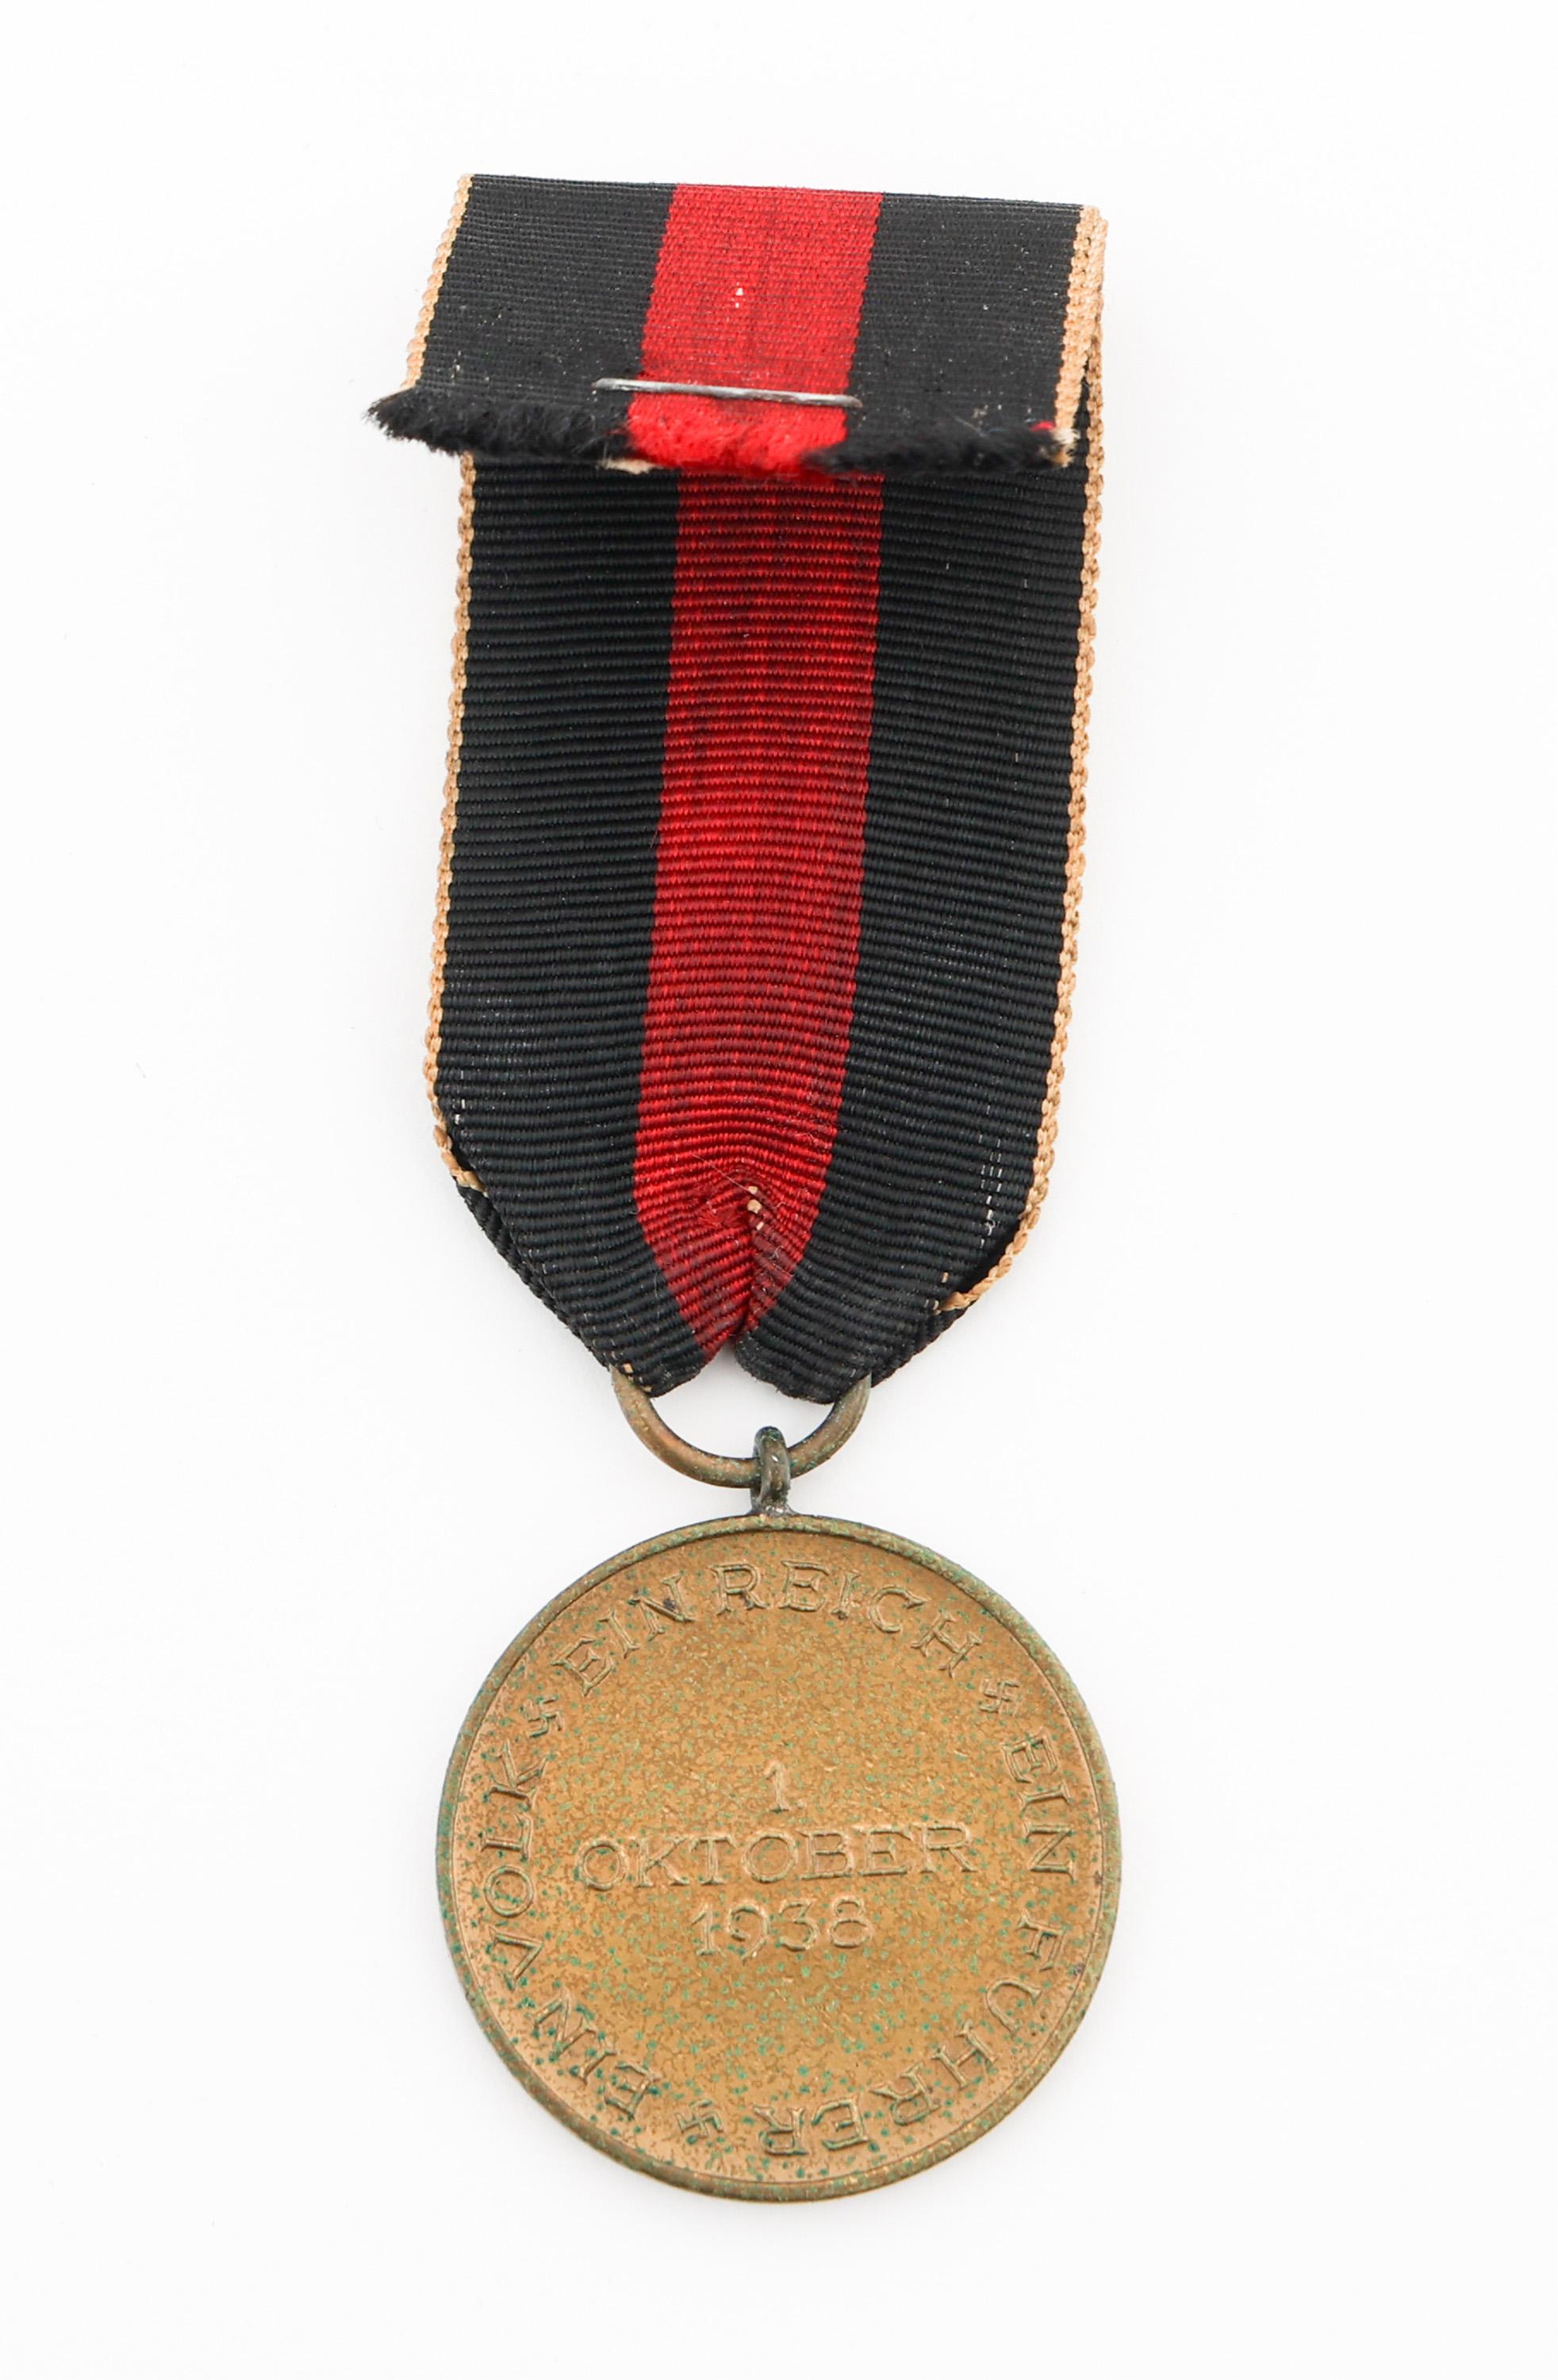 WWII GERMAN INDUSTRY MEDALLION & MEDALS